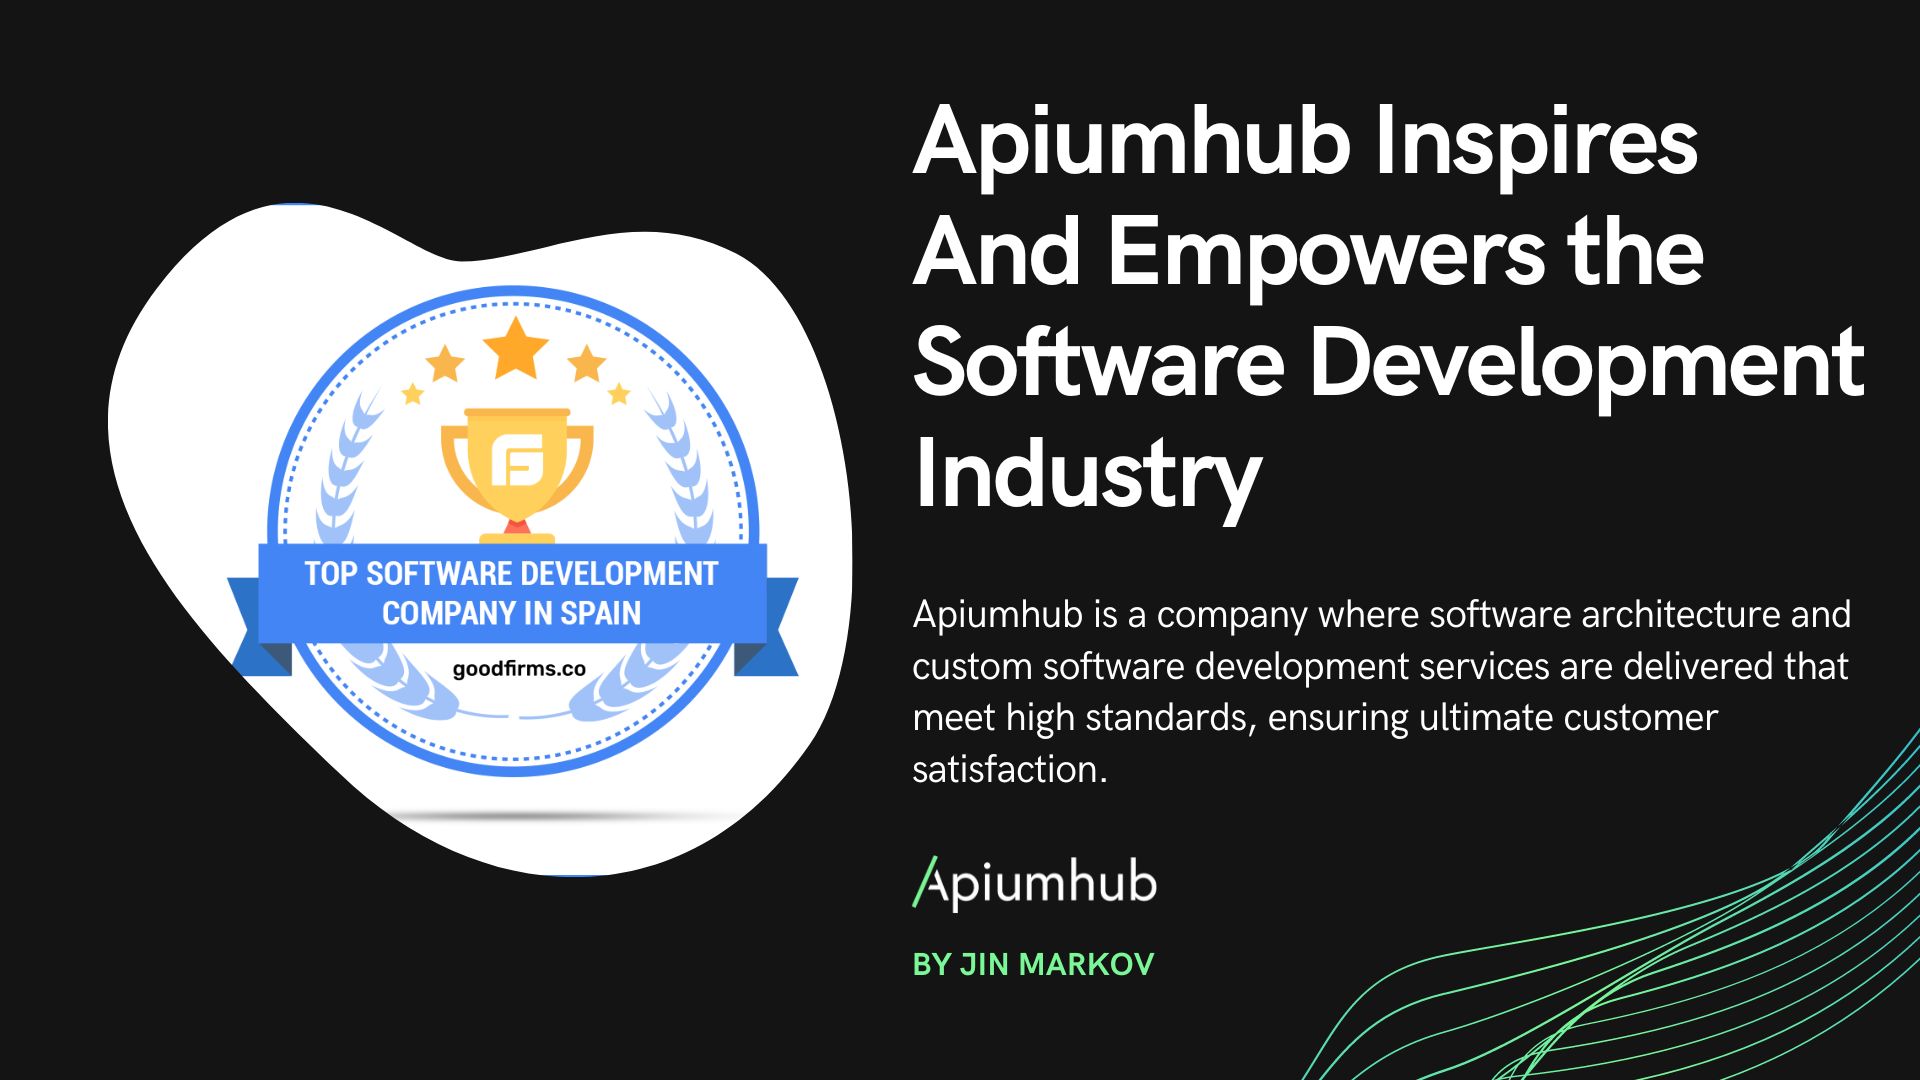 Apiumhub inspires and empowers the software development industry